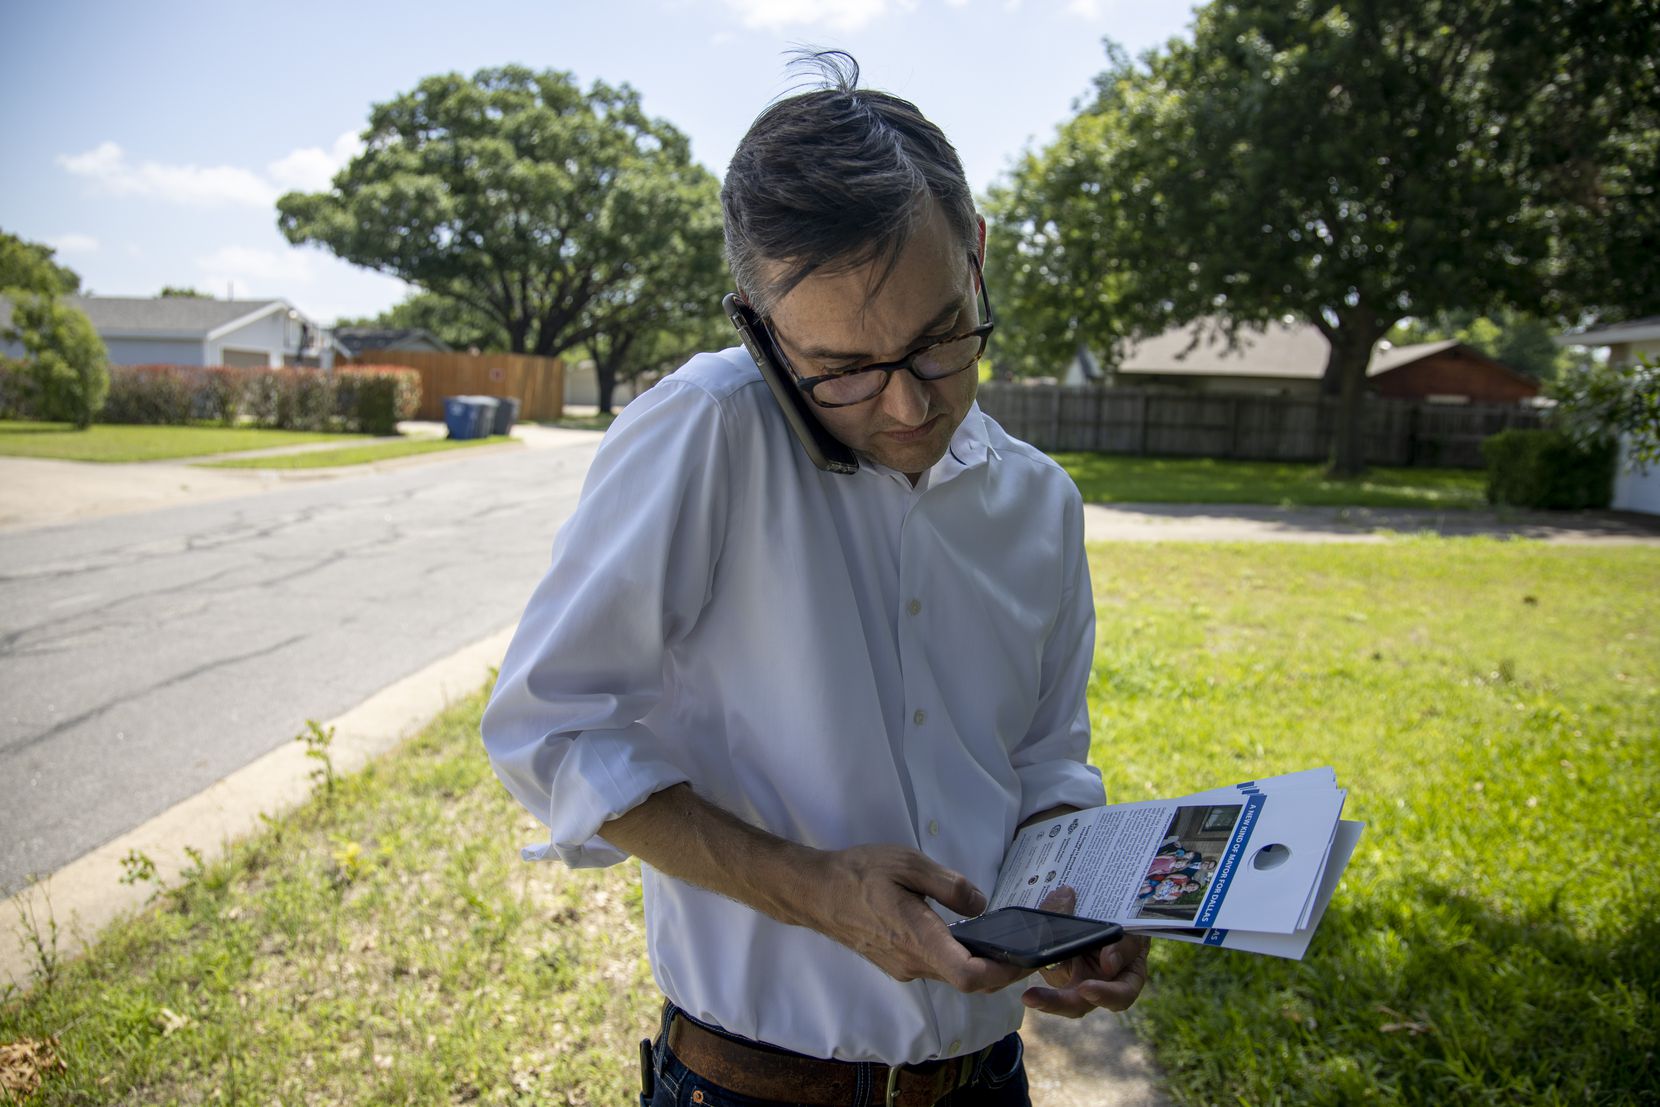 Scott Griggs, a four-term Dallas City Council member and mayoral candidate, answers a call while checking a voter database on his other smartphone as he block-walks in a Lake Highlands neighborhood on Friday, May 24. (Shaban Athuman/Staff Photographer)